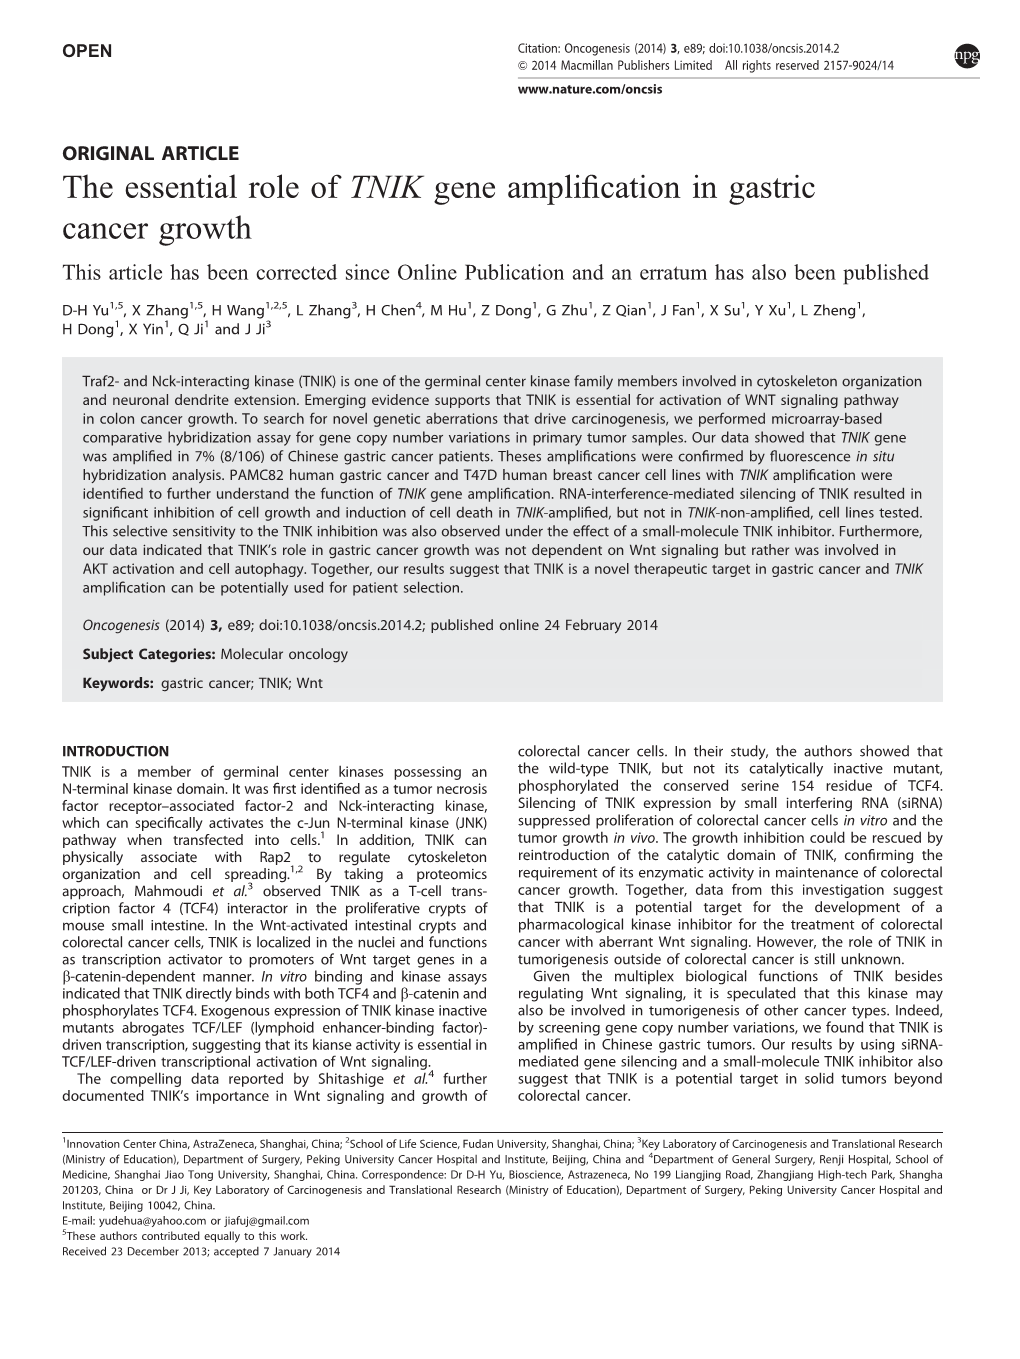 The Essential Role of TNIK Gene Amplification in Gastric Cancer Growth